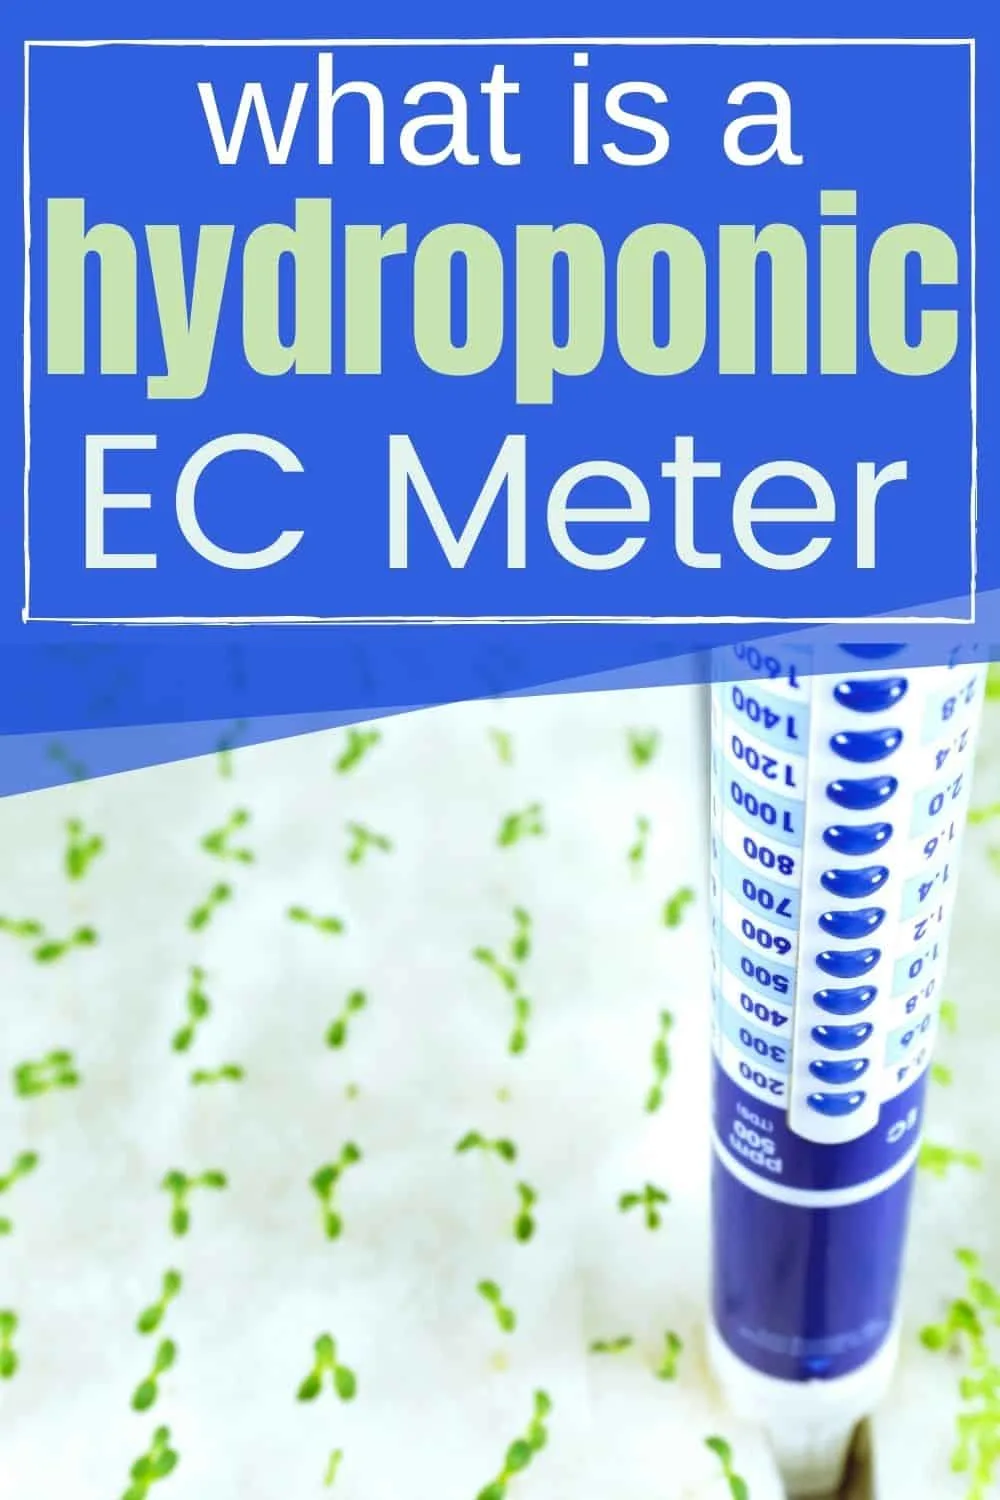 What is a hydroponic EC meter